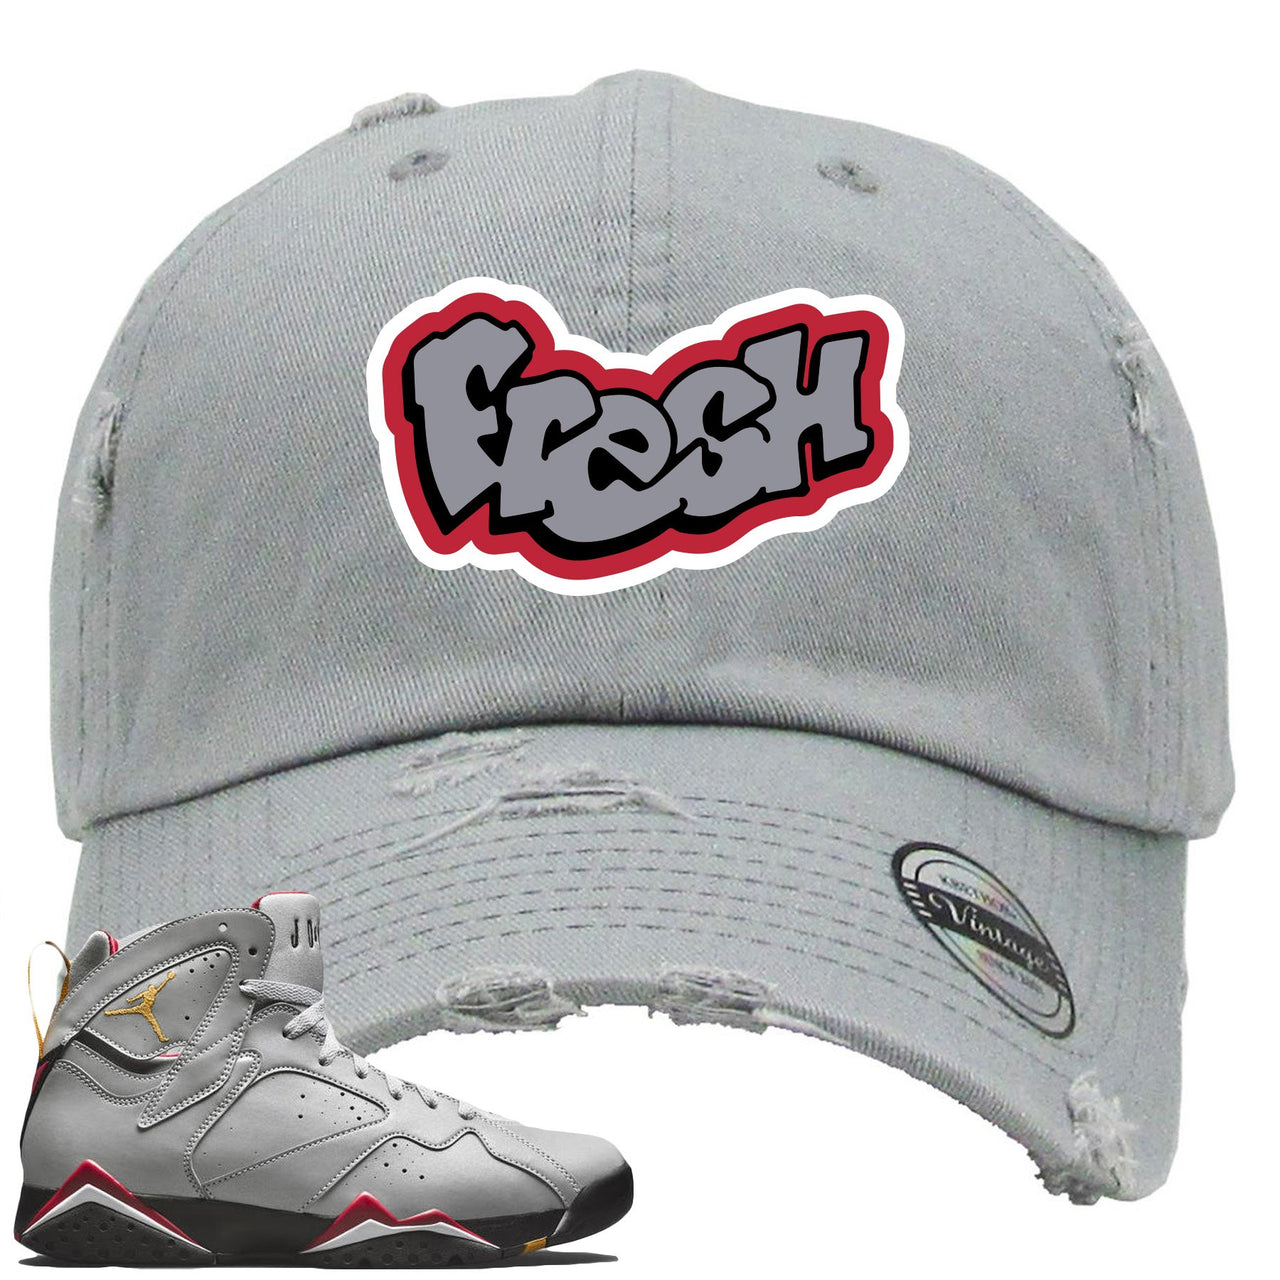 Reflections of a Champion 7s Distressed Dad Hat | Fresh Logo, Gray